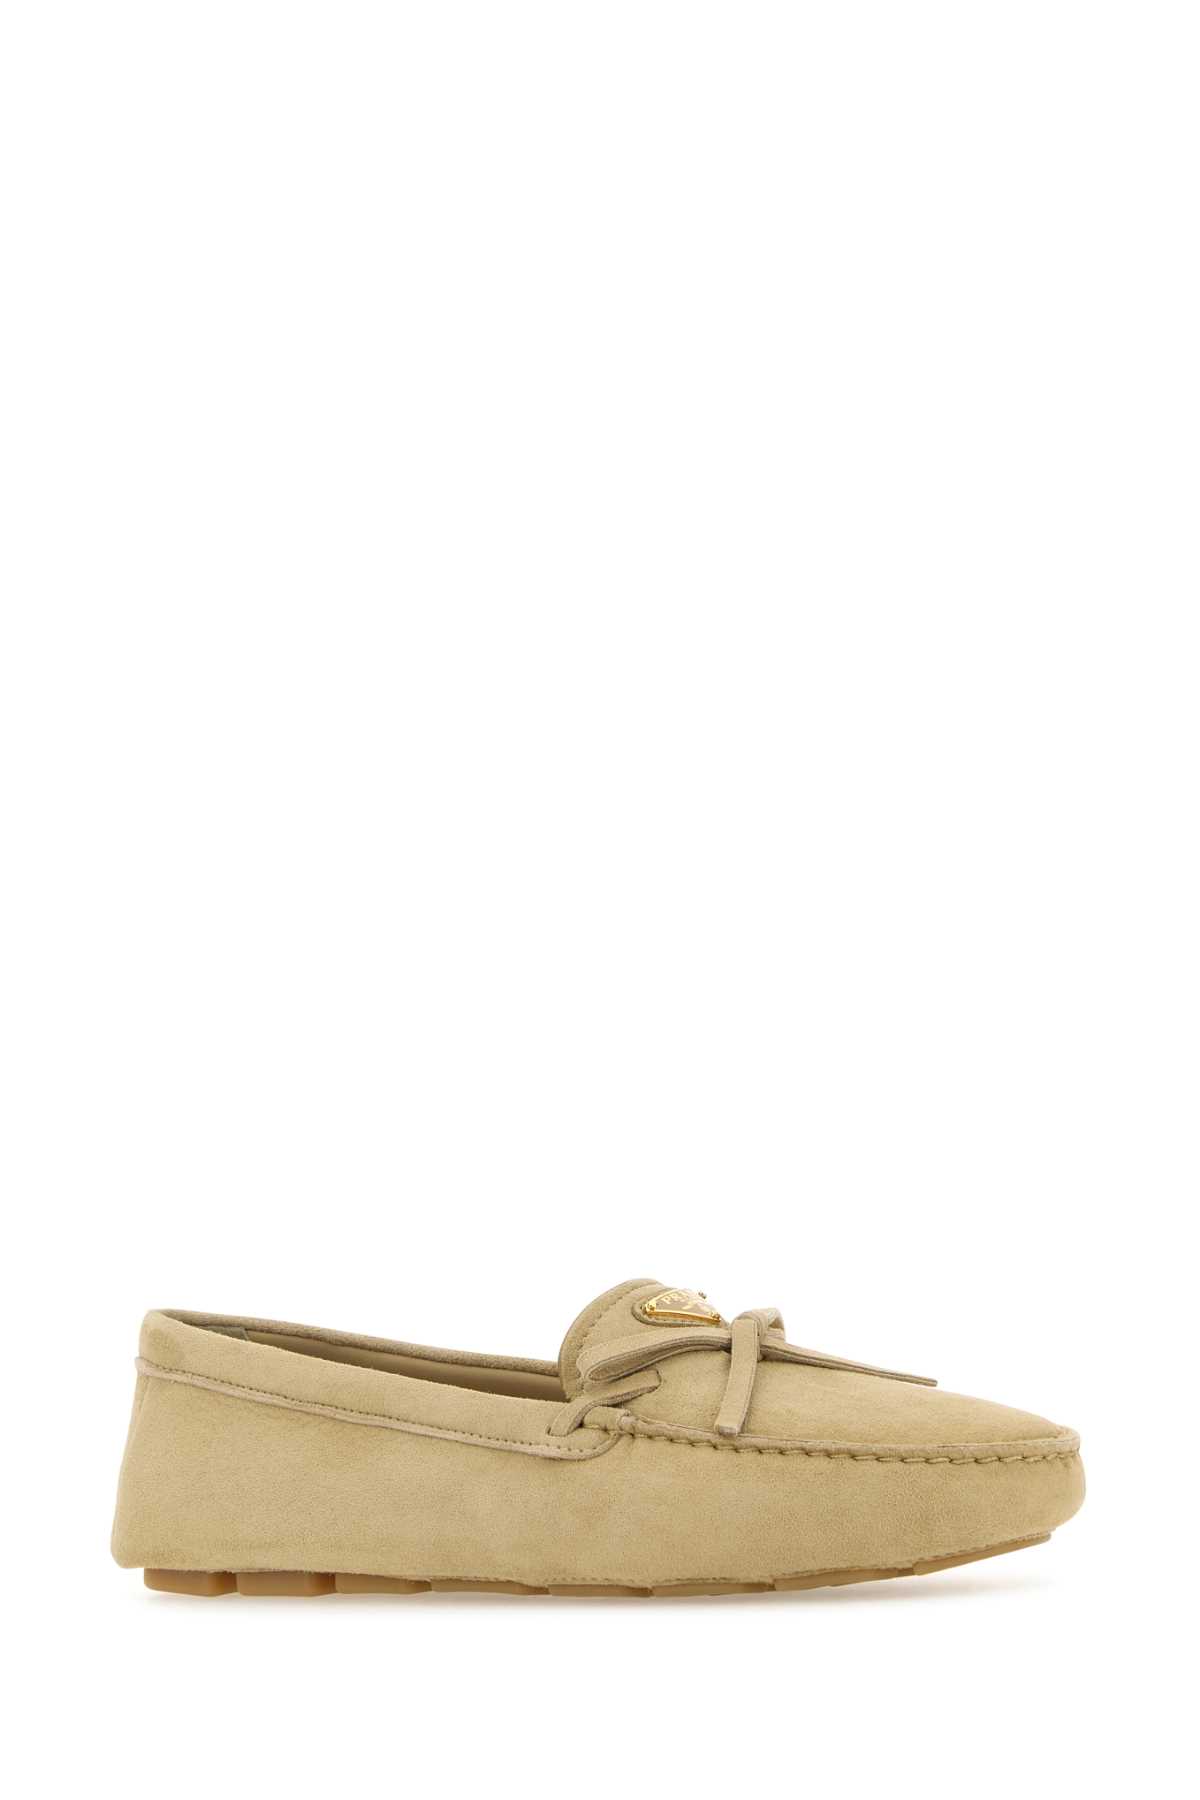 Prada Sand Suede Loafers In Brown